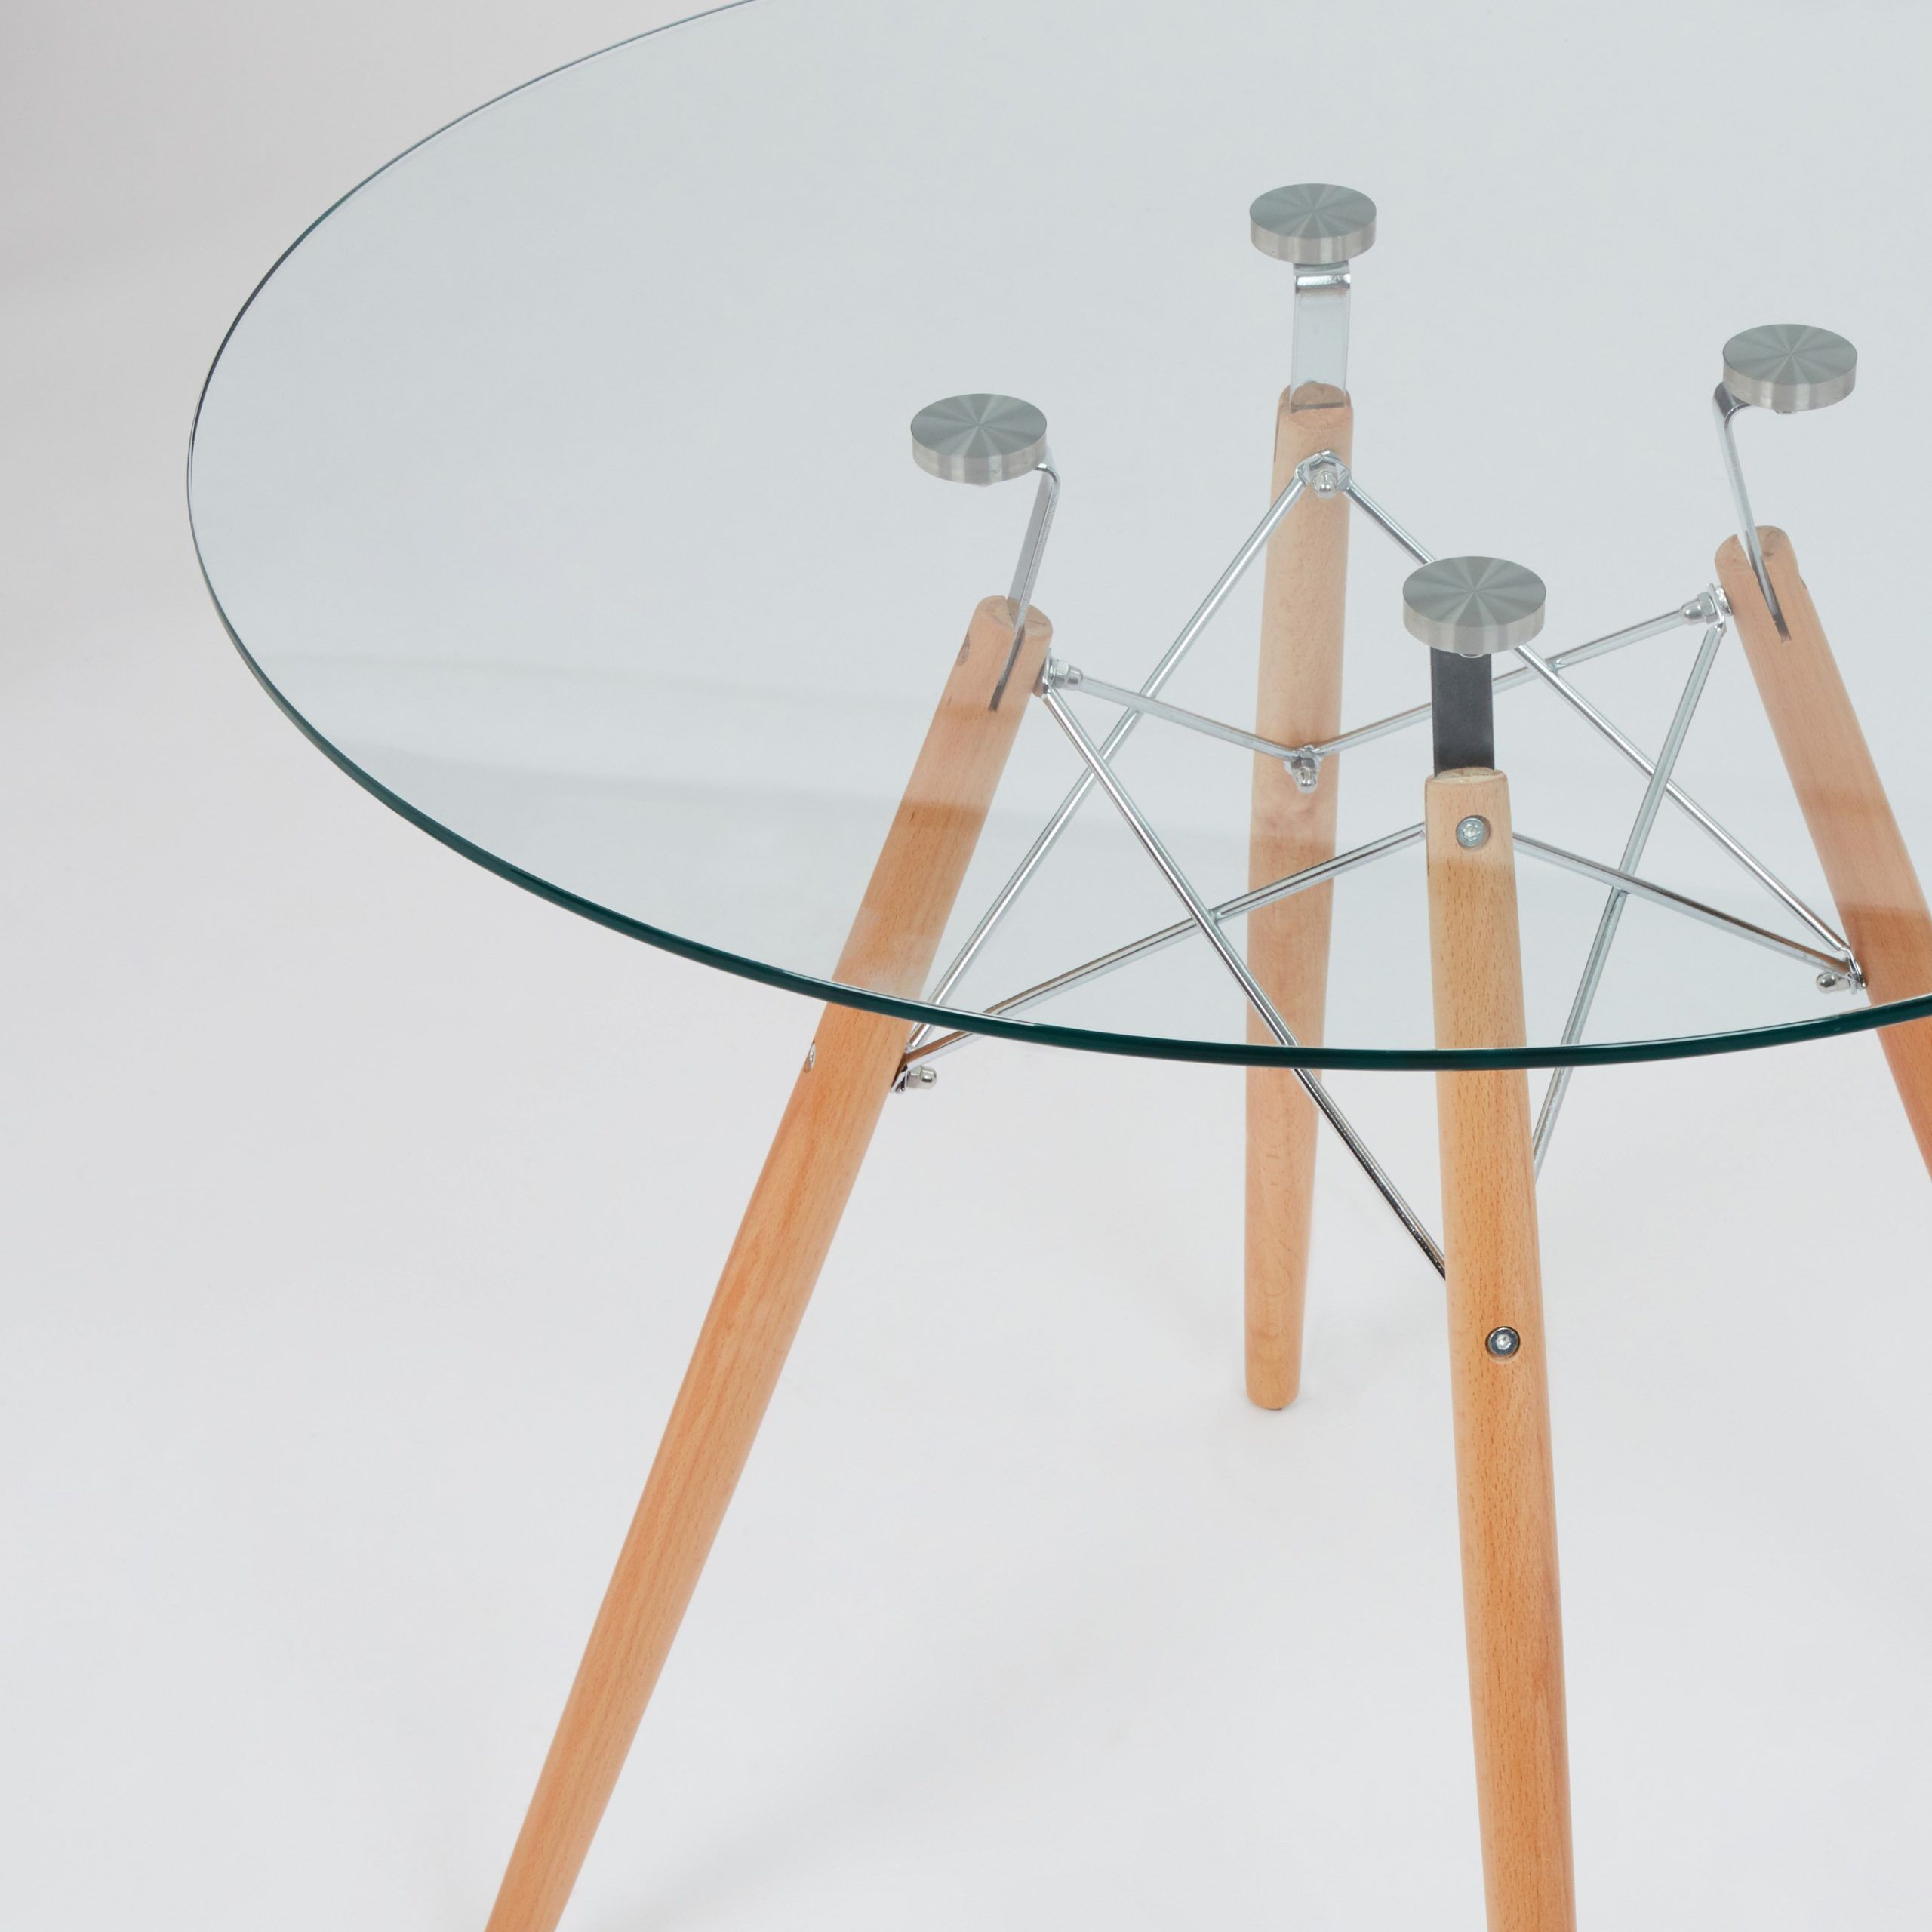 Widely Used Eames Style Dining Tables With Chromed Leg And Tempered Glass Top For Dining Glass Table With Beechwood Legs (size: 80cm (Photo 10 of 25)